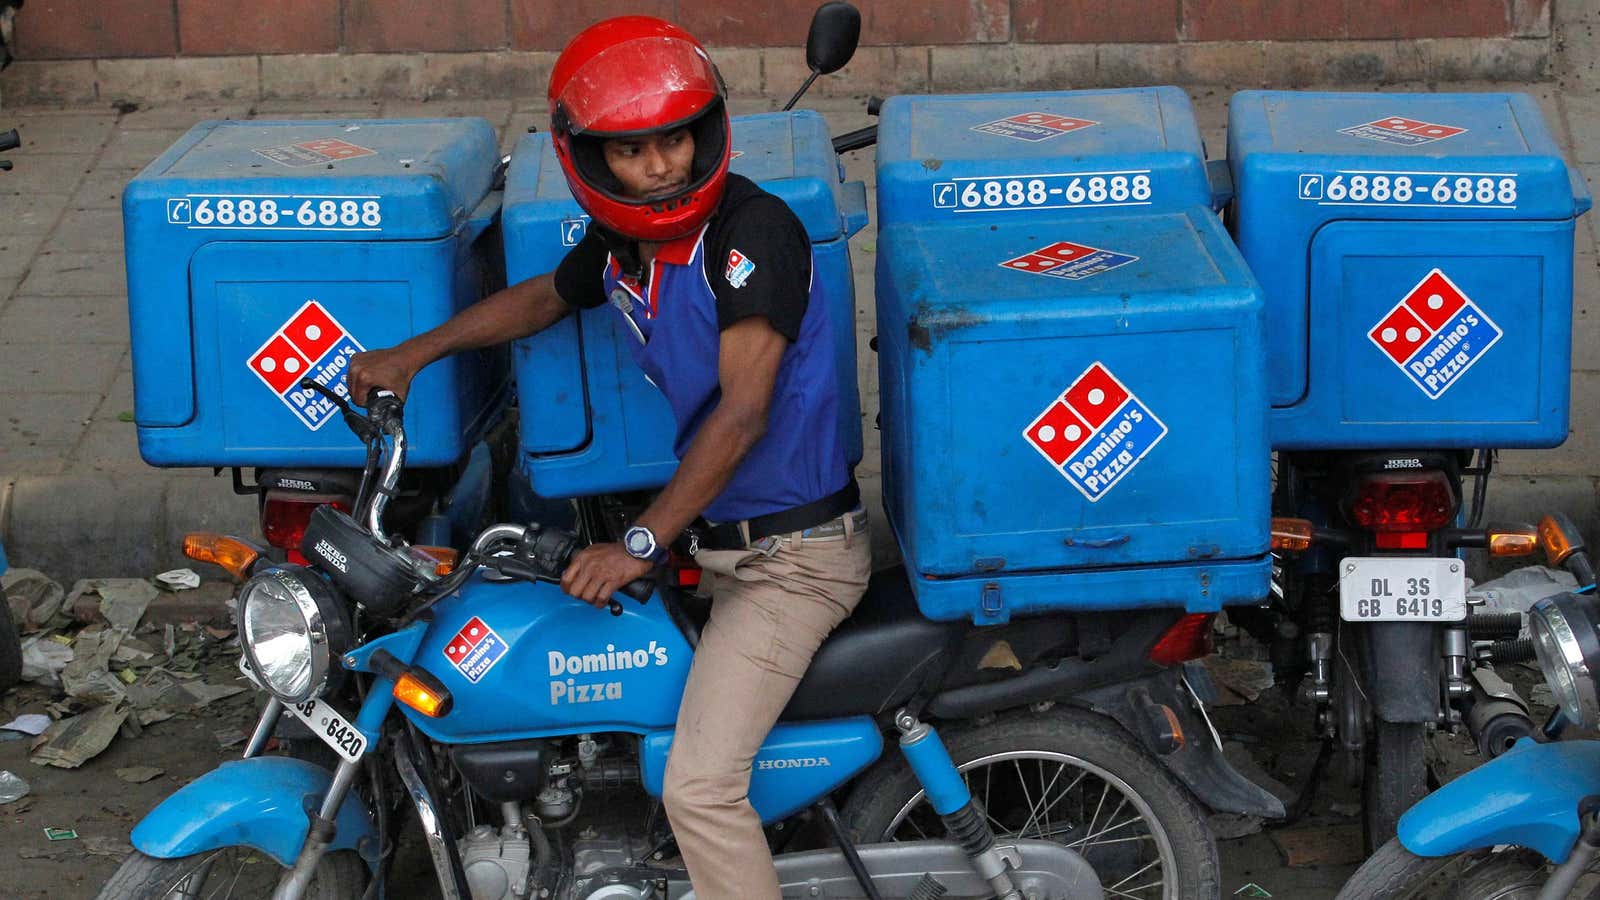 Despite falling profits, global fast-food chains are continuing to expand in India